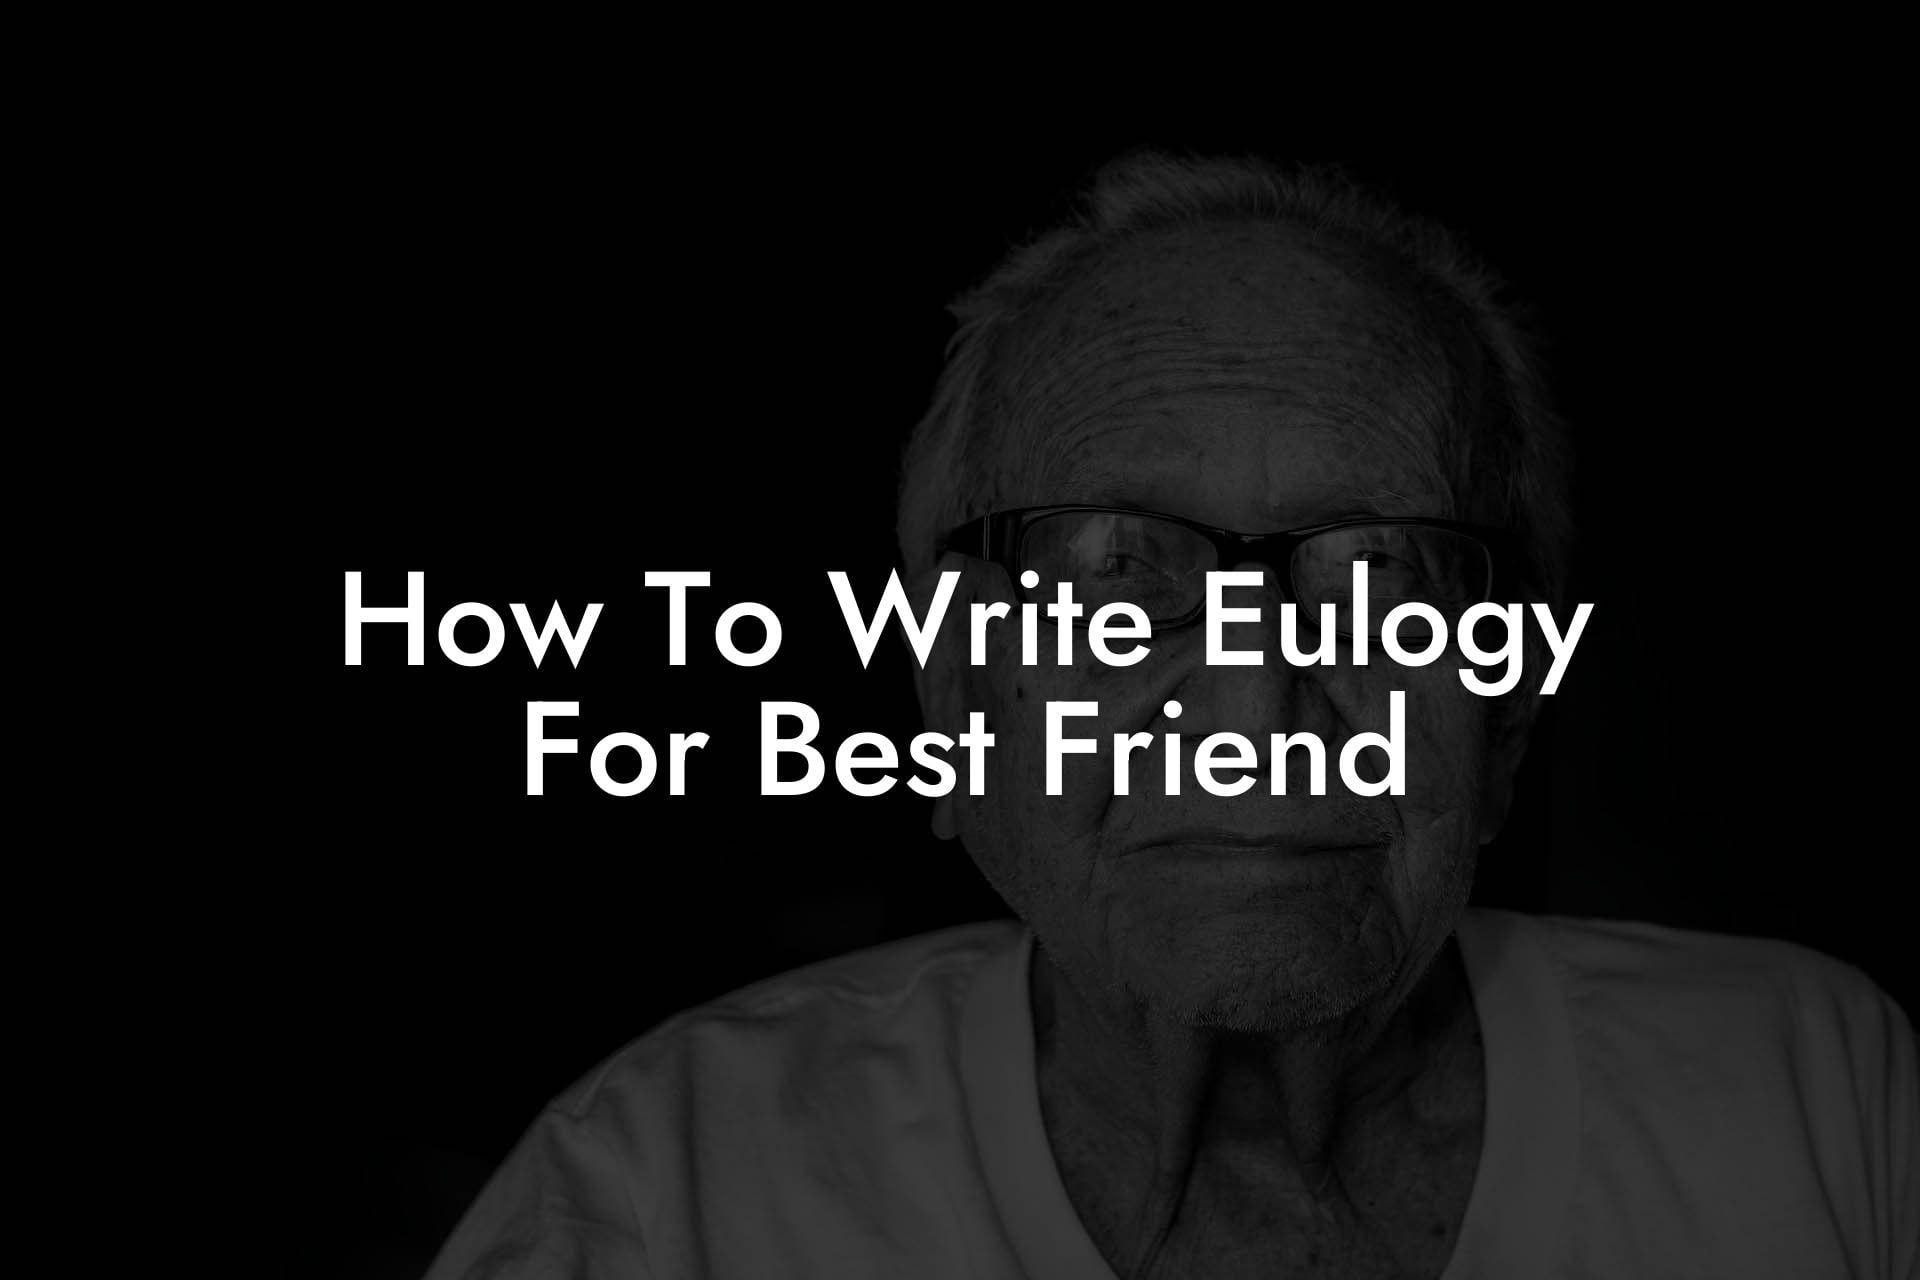 How To Write Eulogy For Best Friend